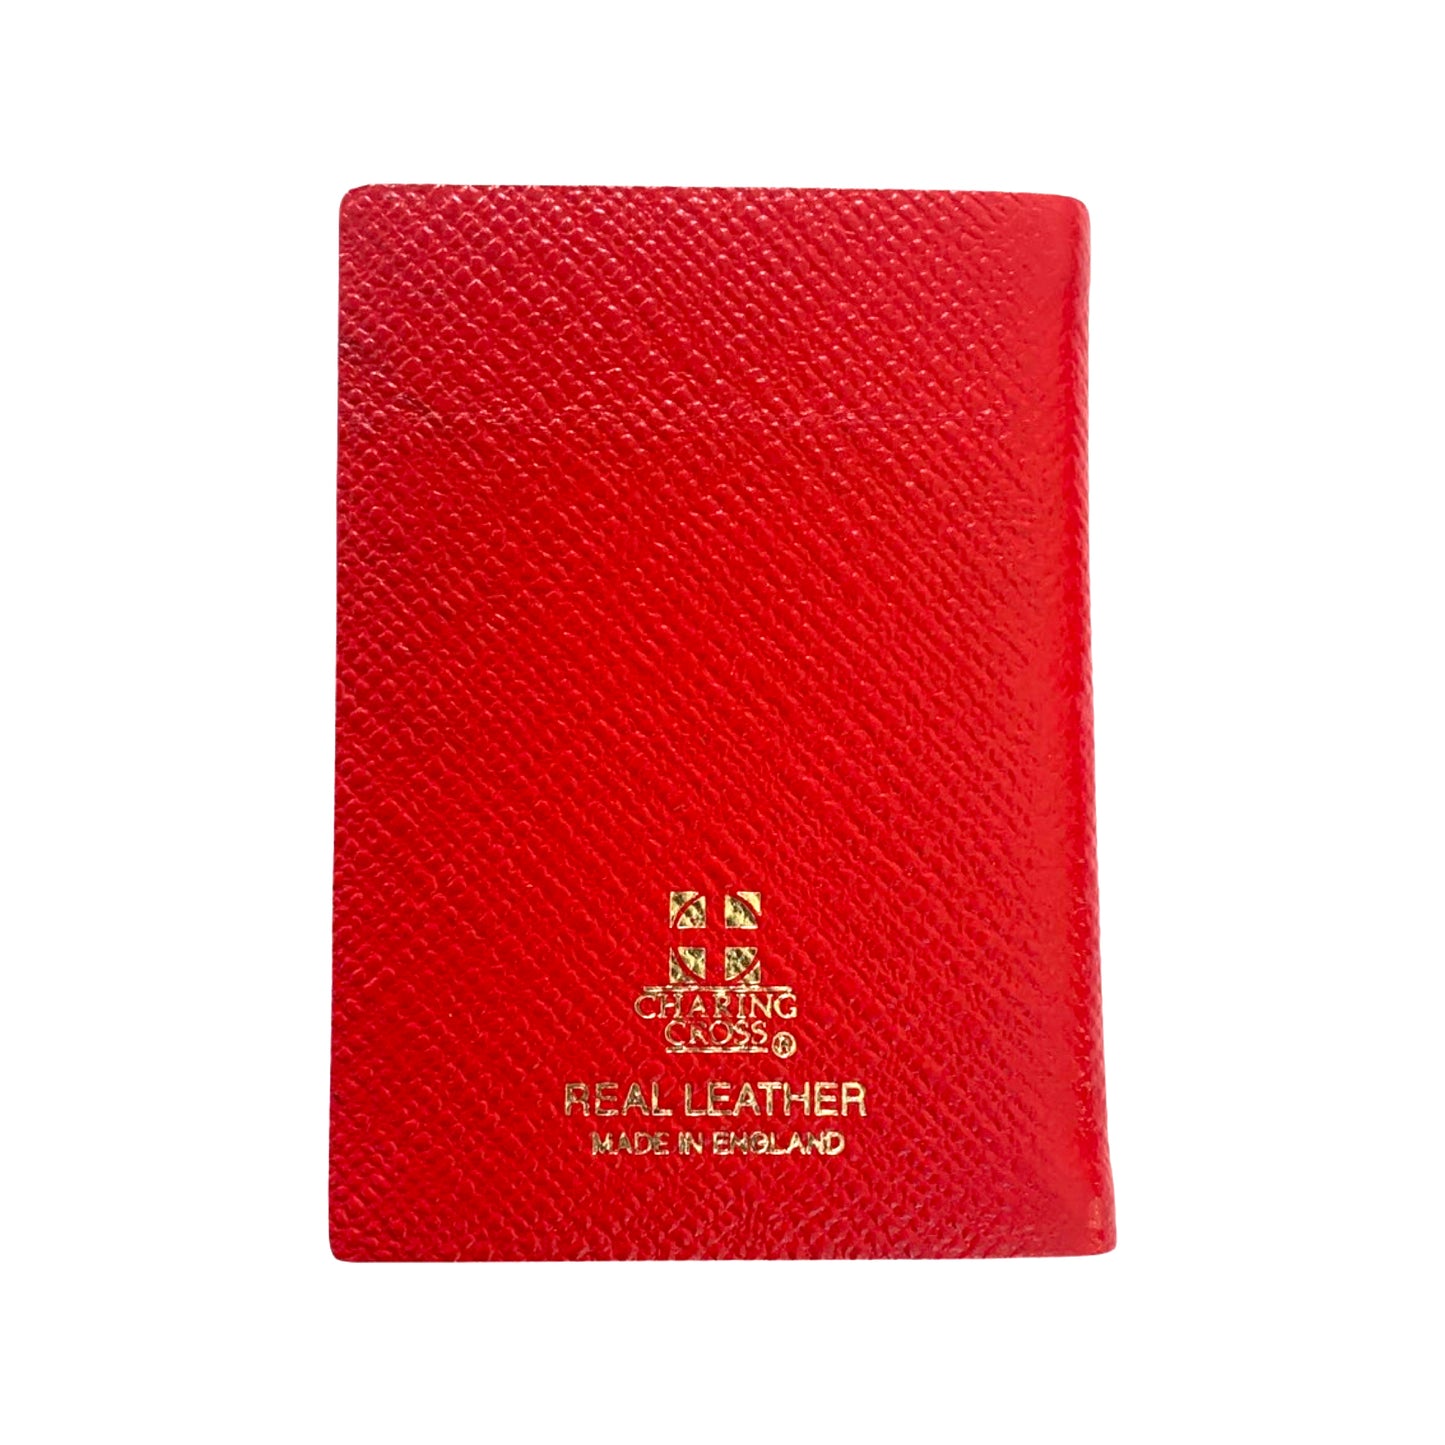 Address Book |  3 by 2.5 inch size | Crossgrain Leather | Charing Cross | A32L